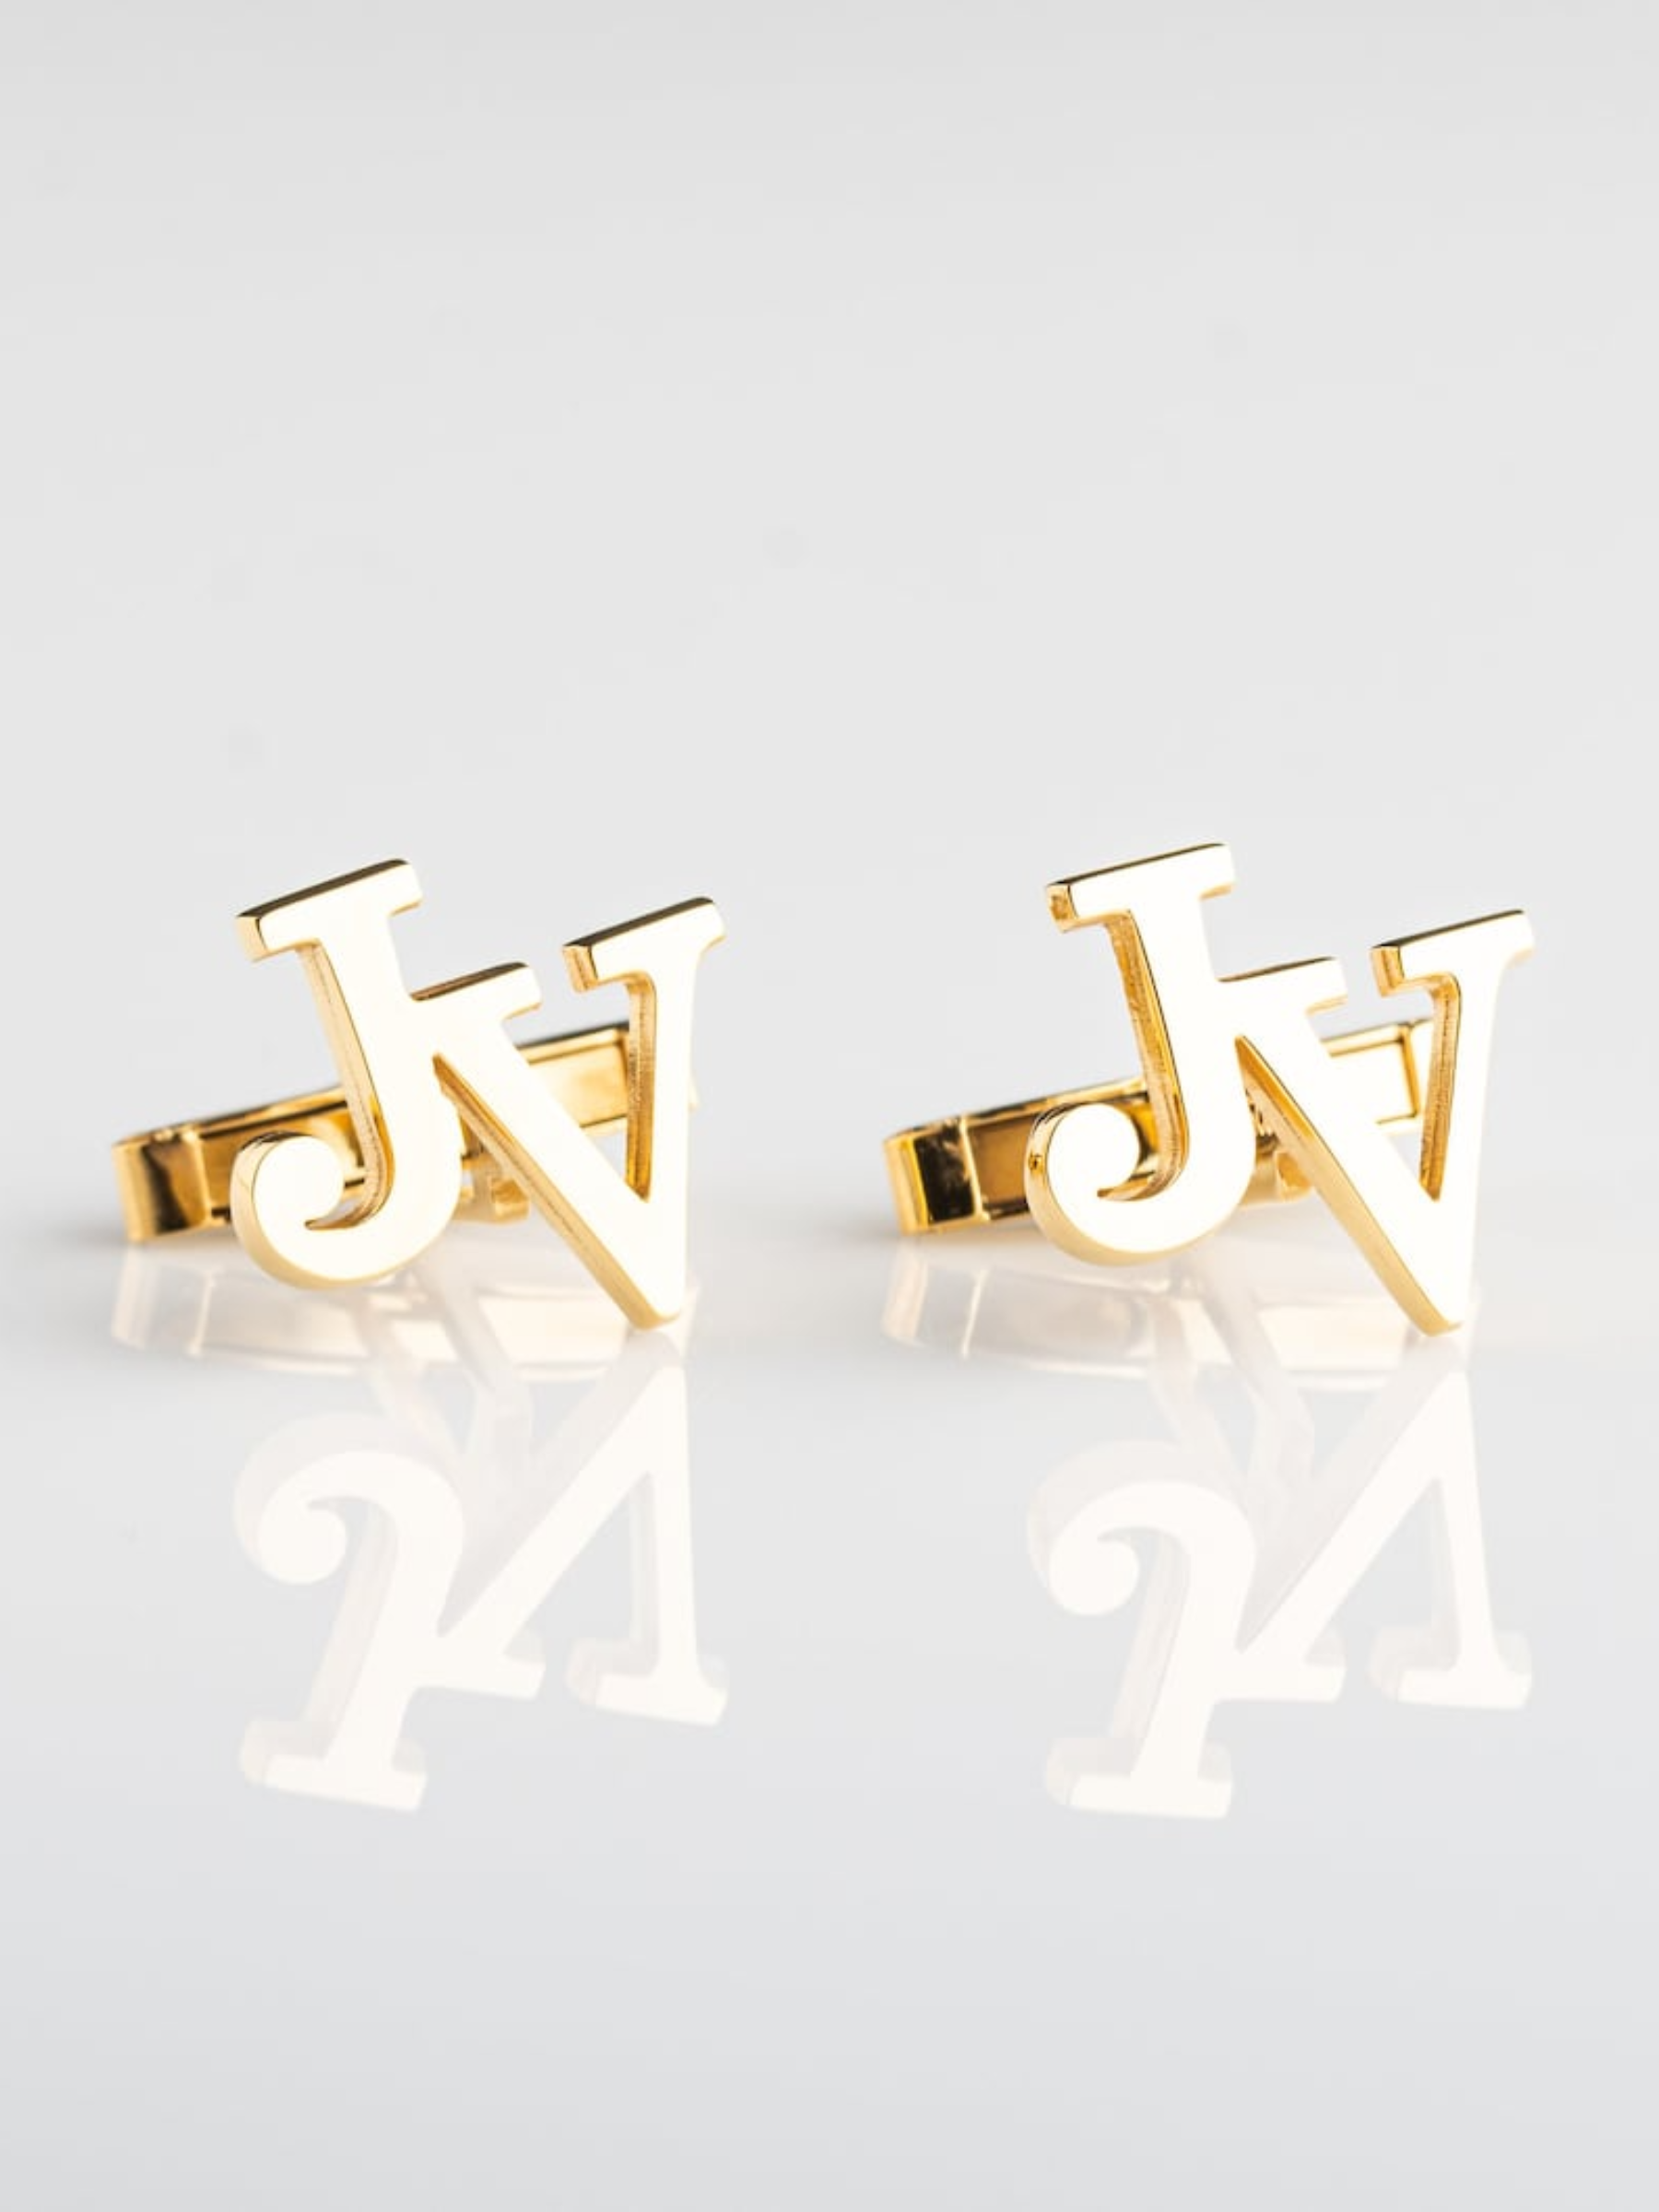 Few things say adulting more than a pair of cufflinks. Whether it’s prom or graduation this personalized accessory will mark a new chapter in their formal dressing era. $58, Etsy. <a href="https://www.etsy.com/listing/1220502080/customized-cufflinks-groom-wedding?">Get it now!</a><p>Sign up for today’s biggest stories, from pop culture to politics.</p><a href="https://www.glamour.com/newsletter/news?sourceCode=msnsend">Sign Up</a>